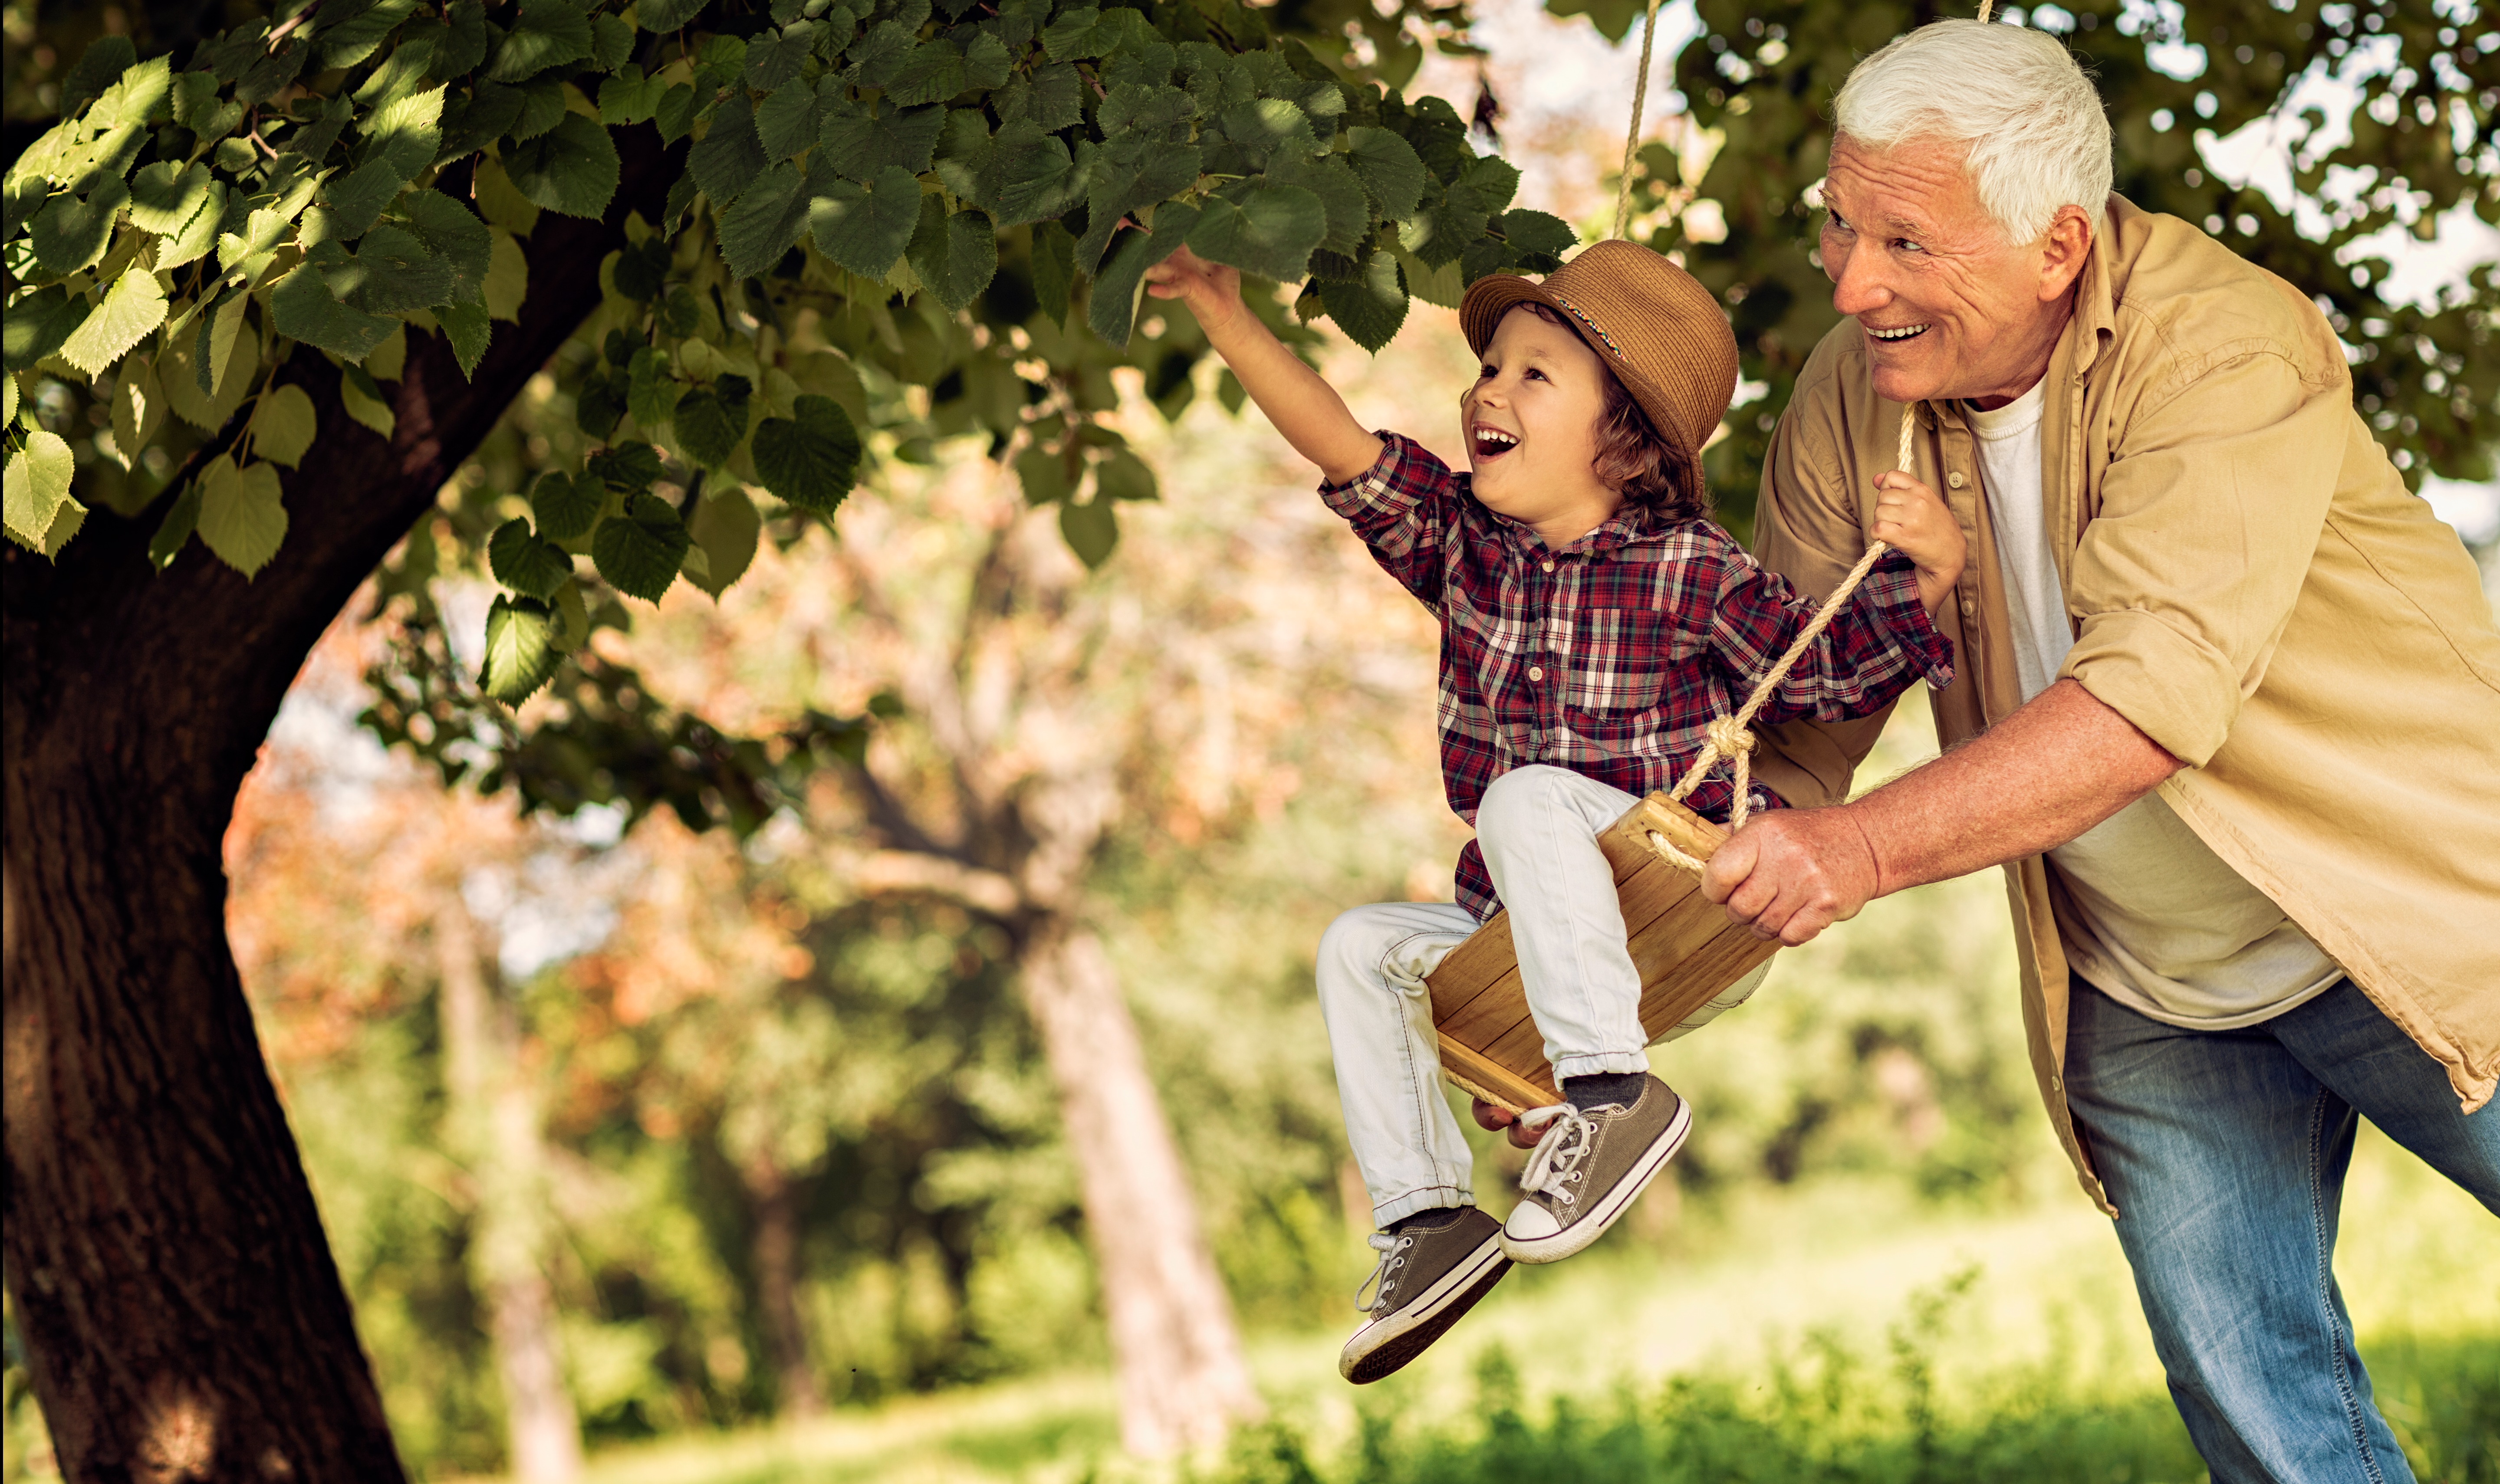 Senior gentleman pushing young child on a swing, while the child reaches for leaves in the tree.